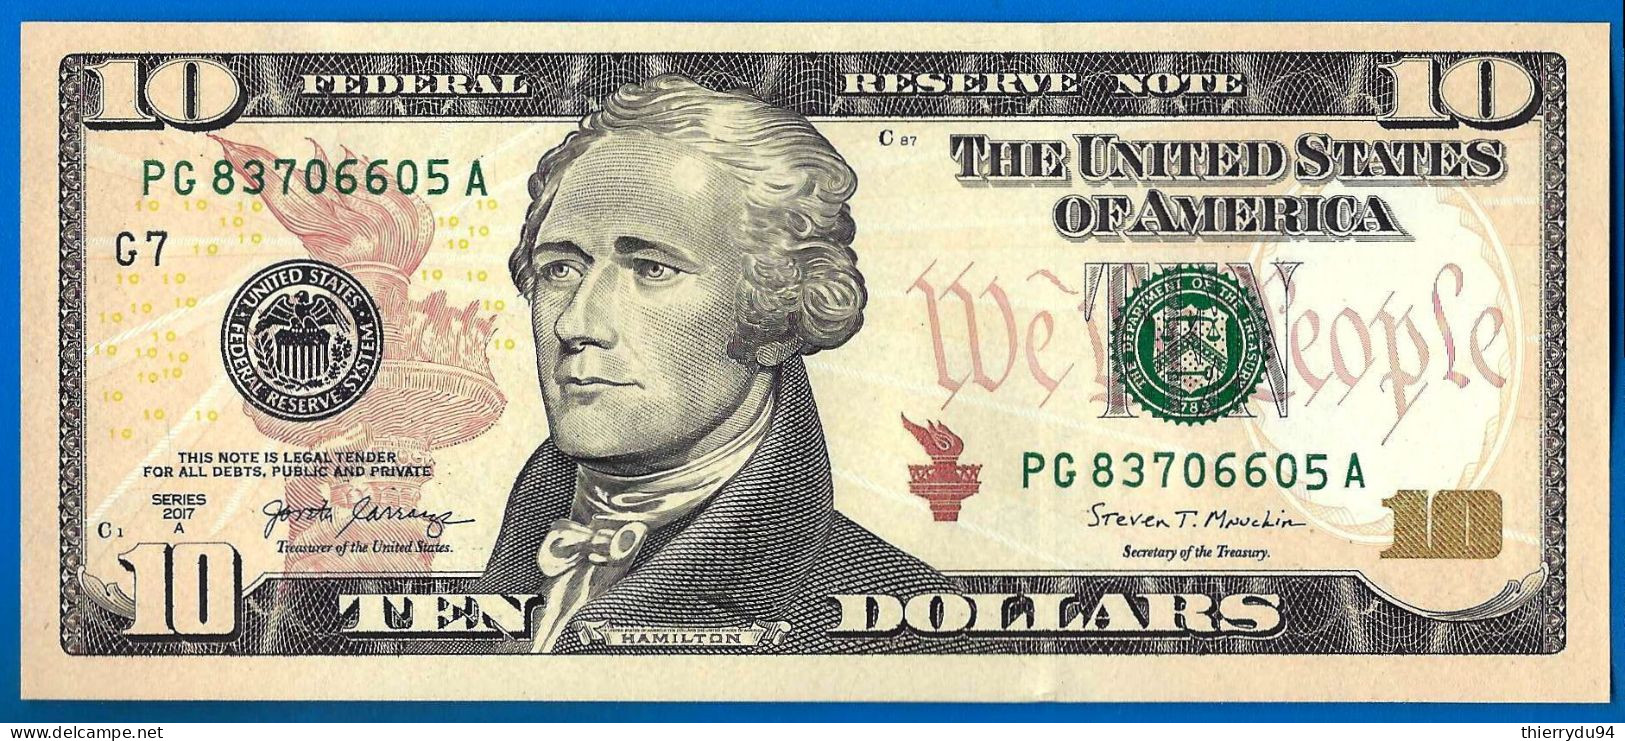 USA 10 Dollars 2017 A Neuf UNC Mint Chicago G7 Suffixe A Etats Unis United States Dollar Paypal Bitcoin - Federal Reserve Notes (1928-...)